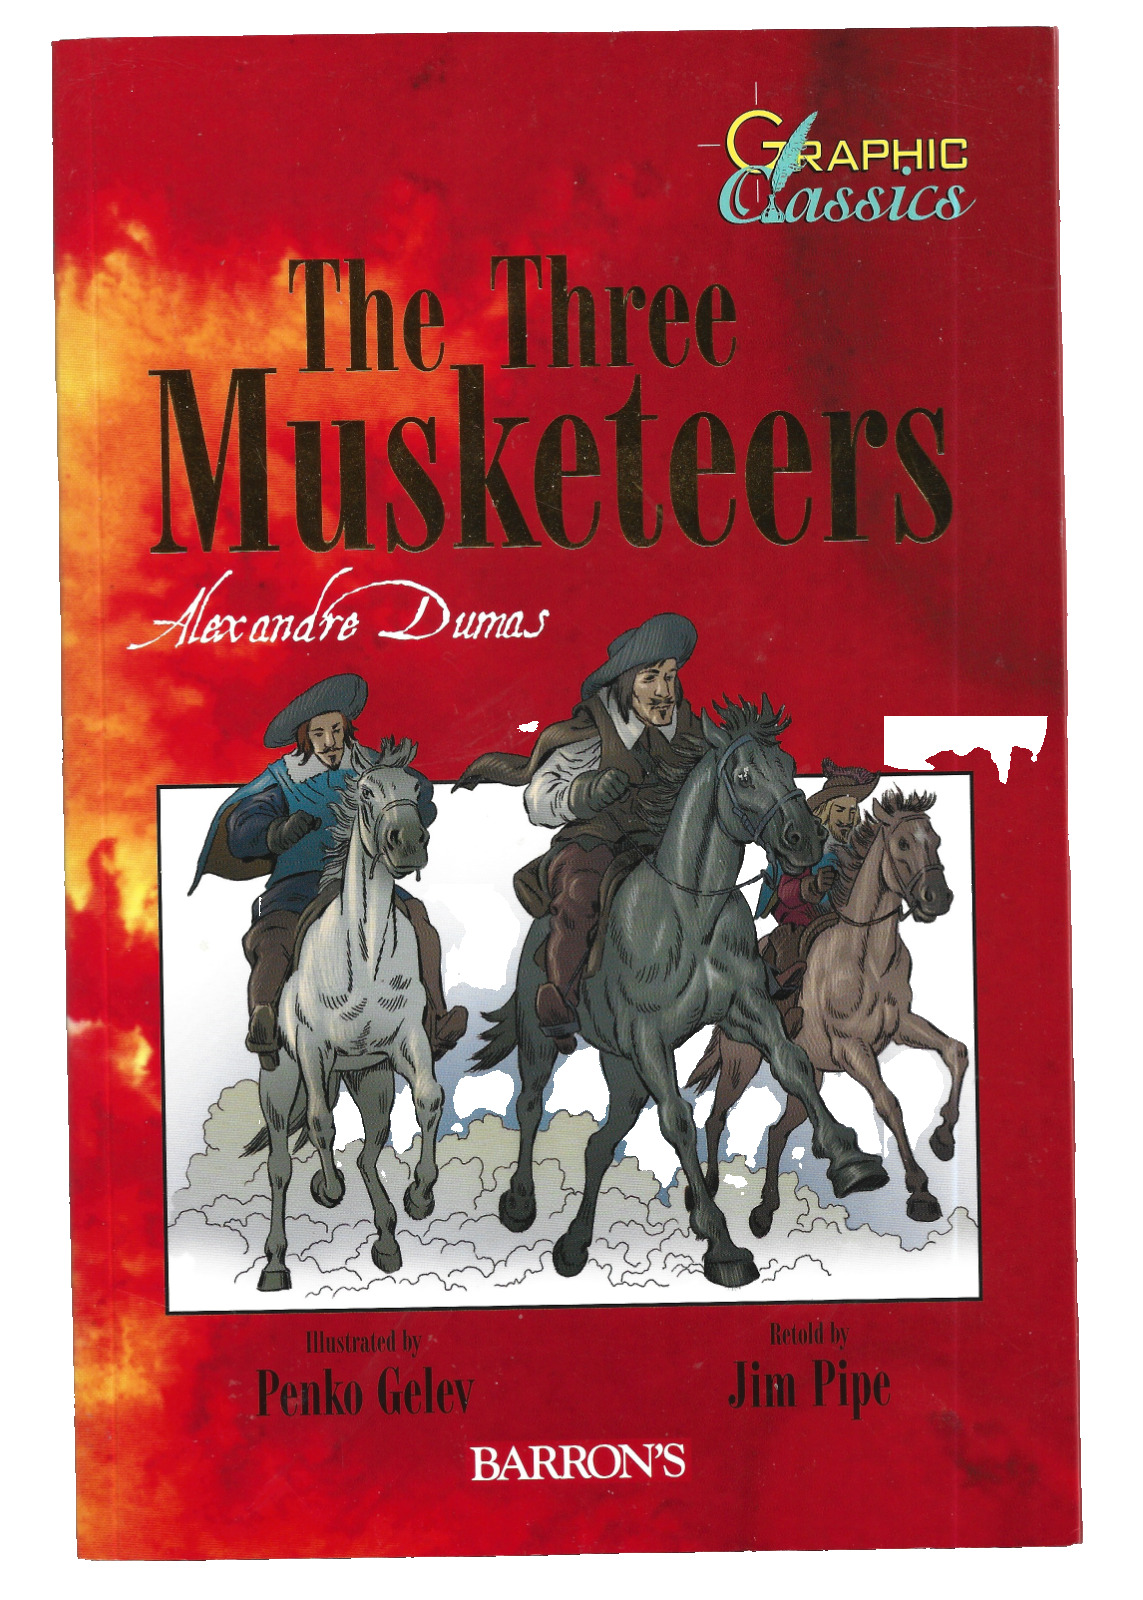 THE THREE MUSKETEERS BY ALEXANDRE DUMAS ~ GRAPHIC NOVEL CLASSIC BY BARRON'S